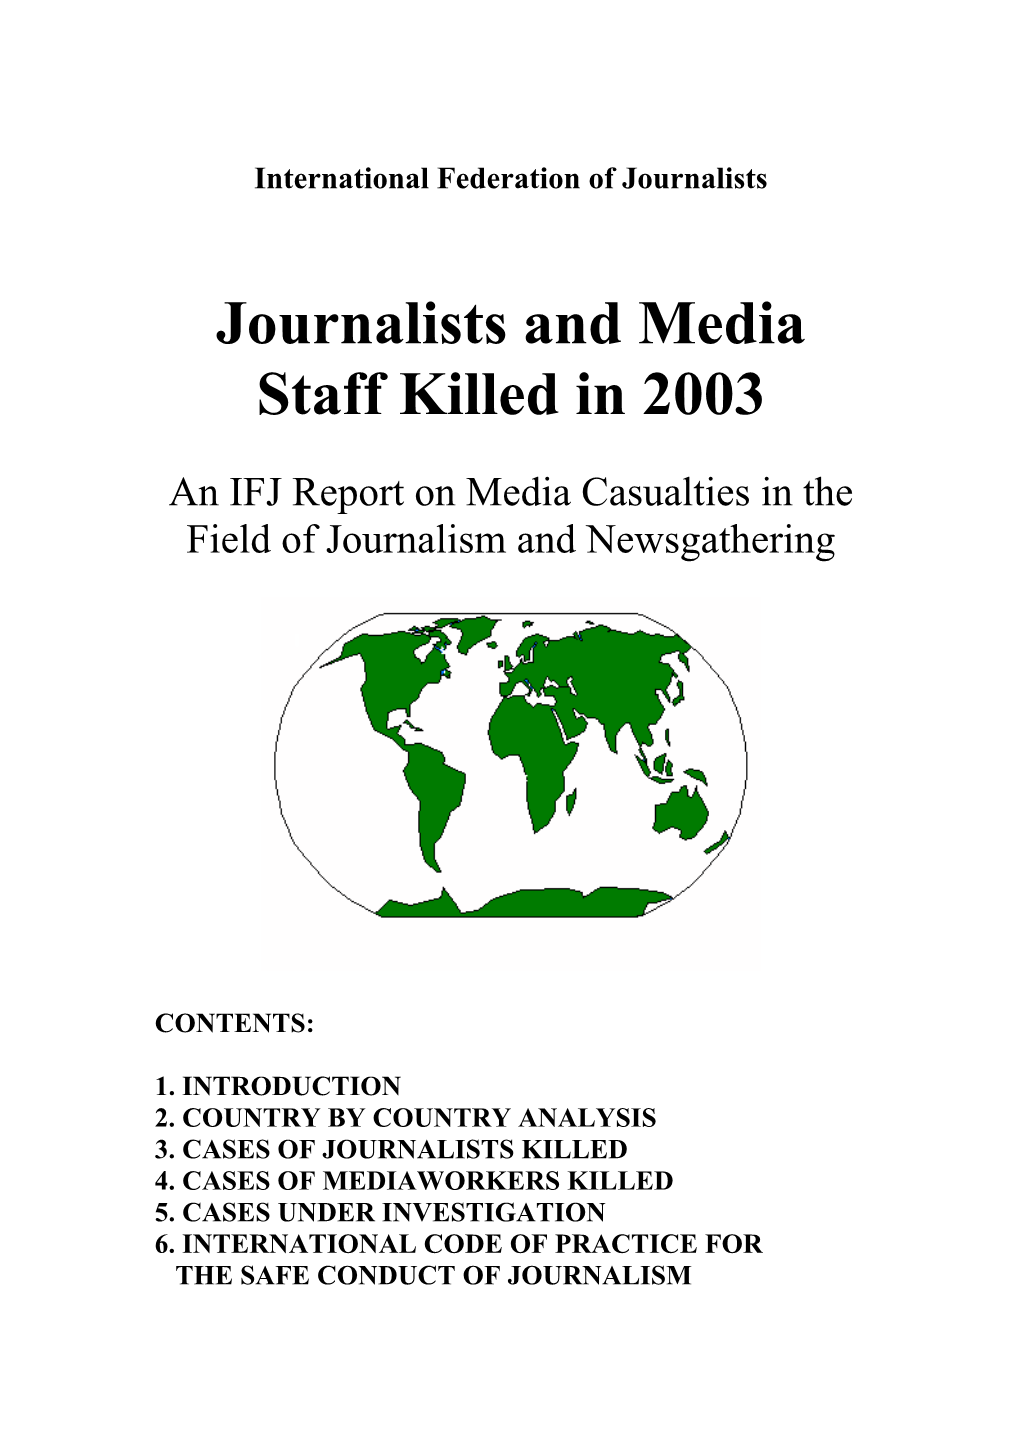 Journalists and Media Staff Killed in 2003